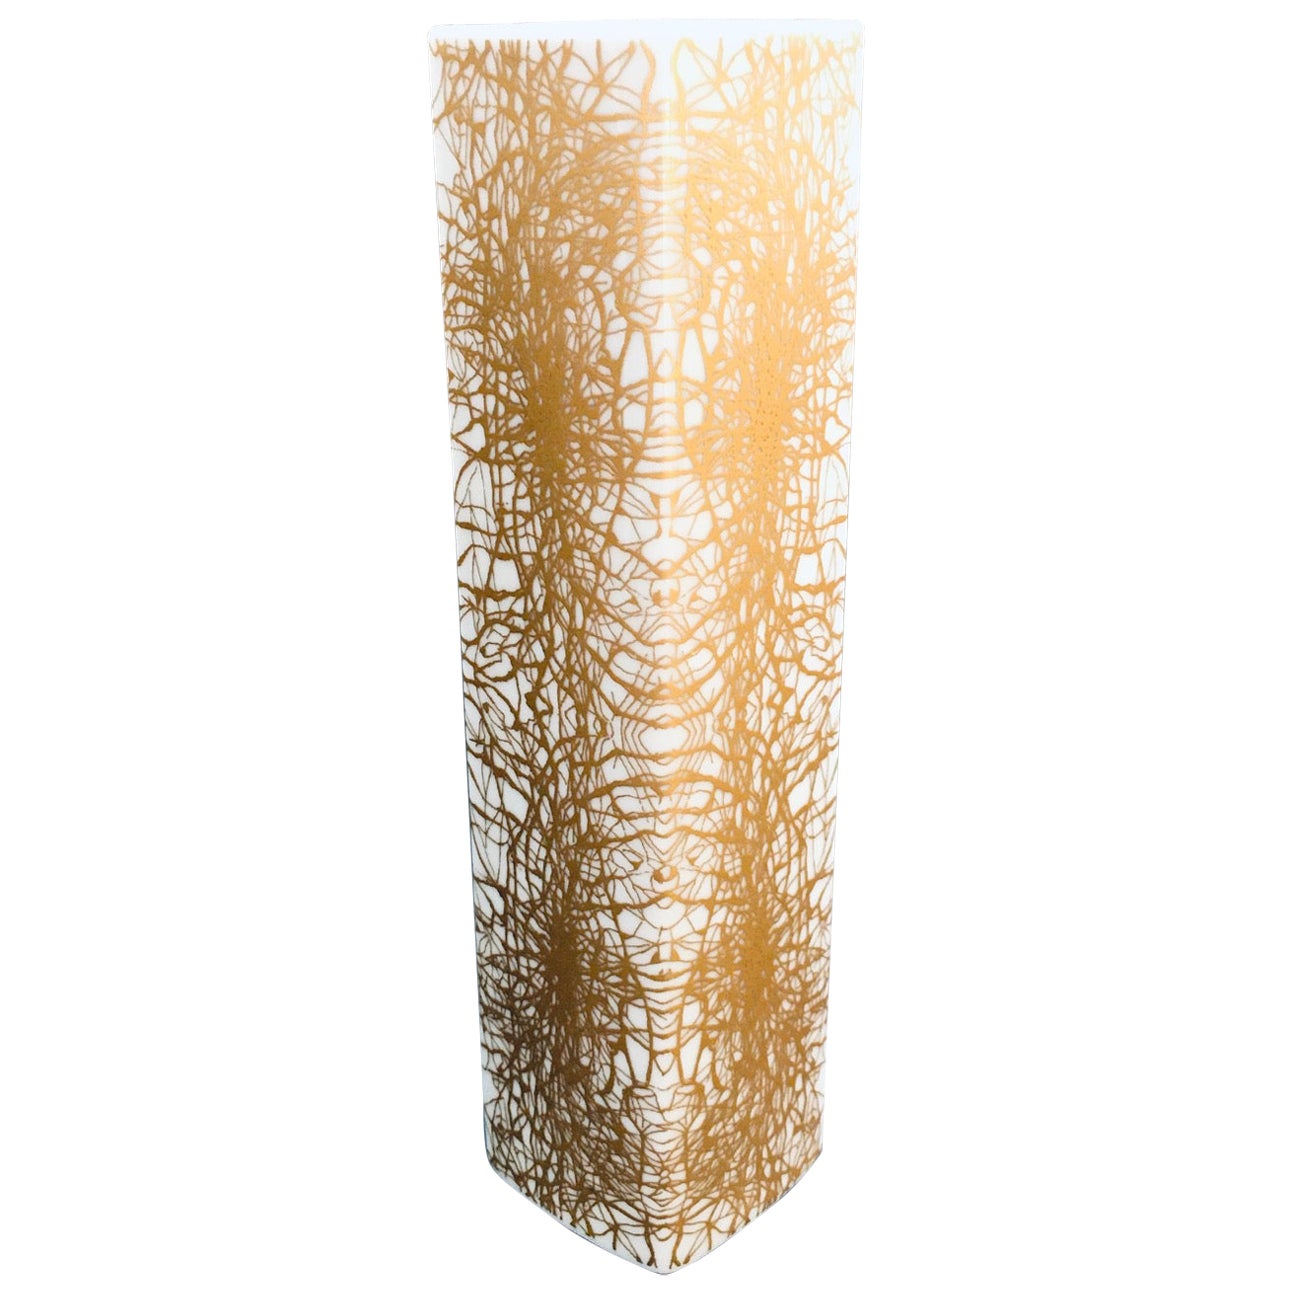 Art Porcelain Abstract Gold Pattern Vase by Heinrich & Co Selb Bavaria, Germany 